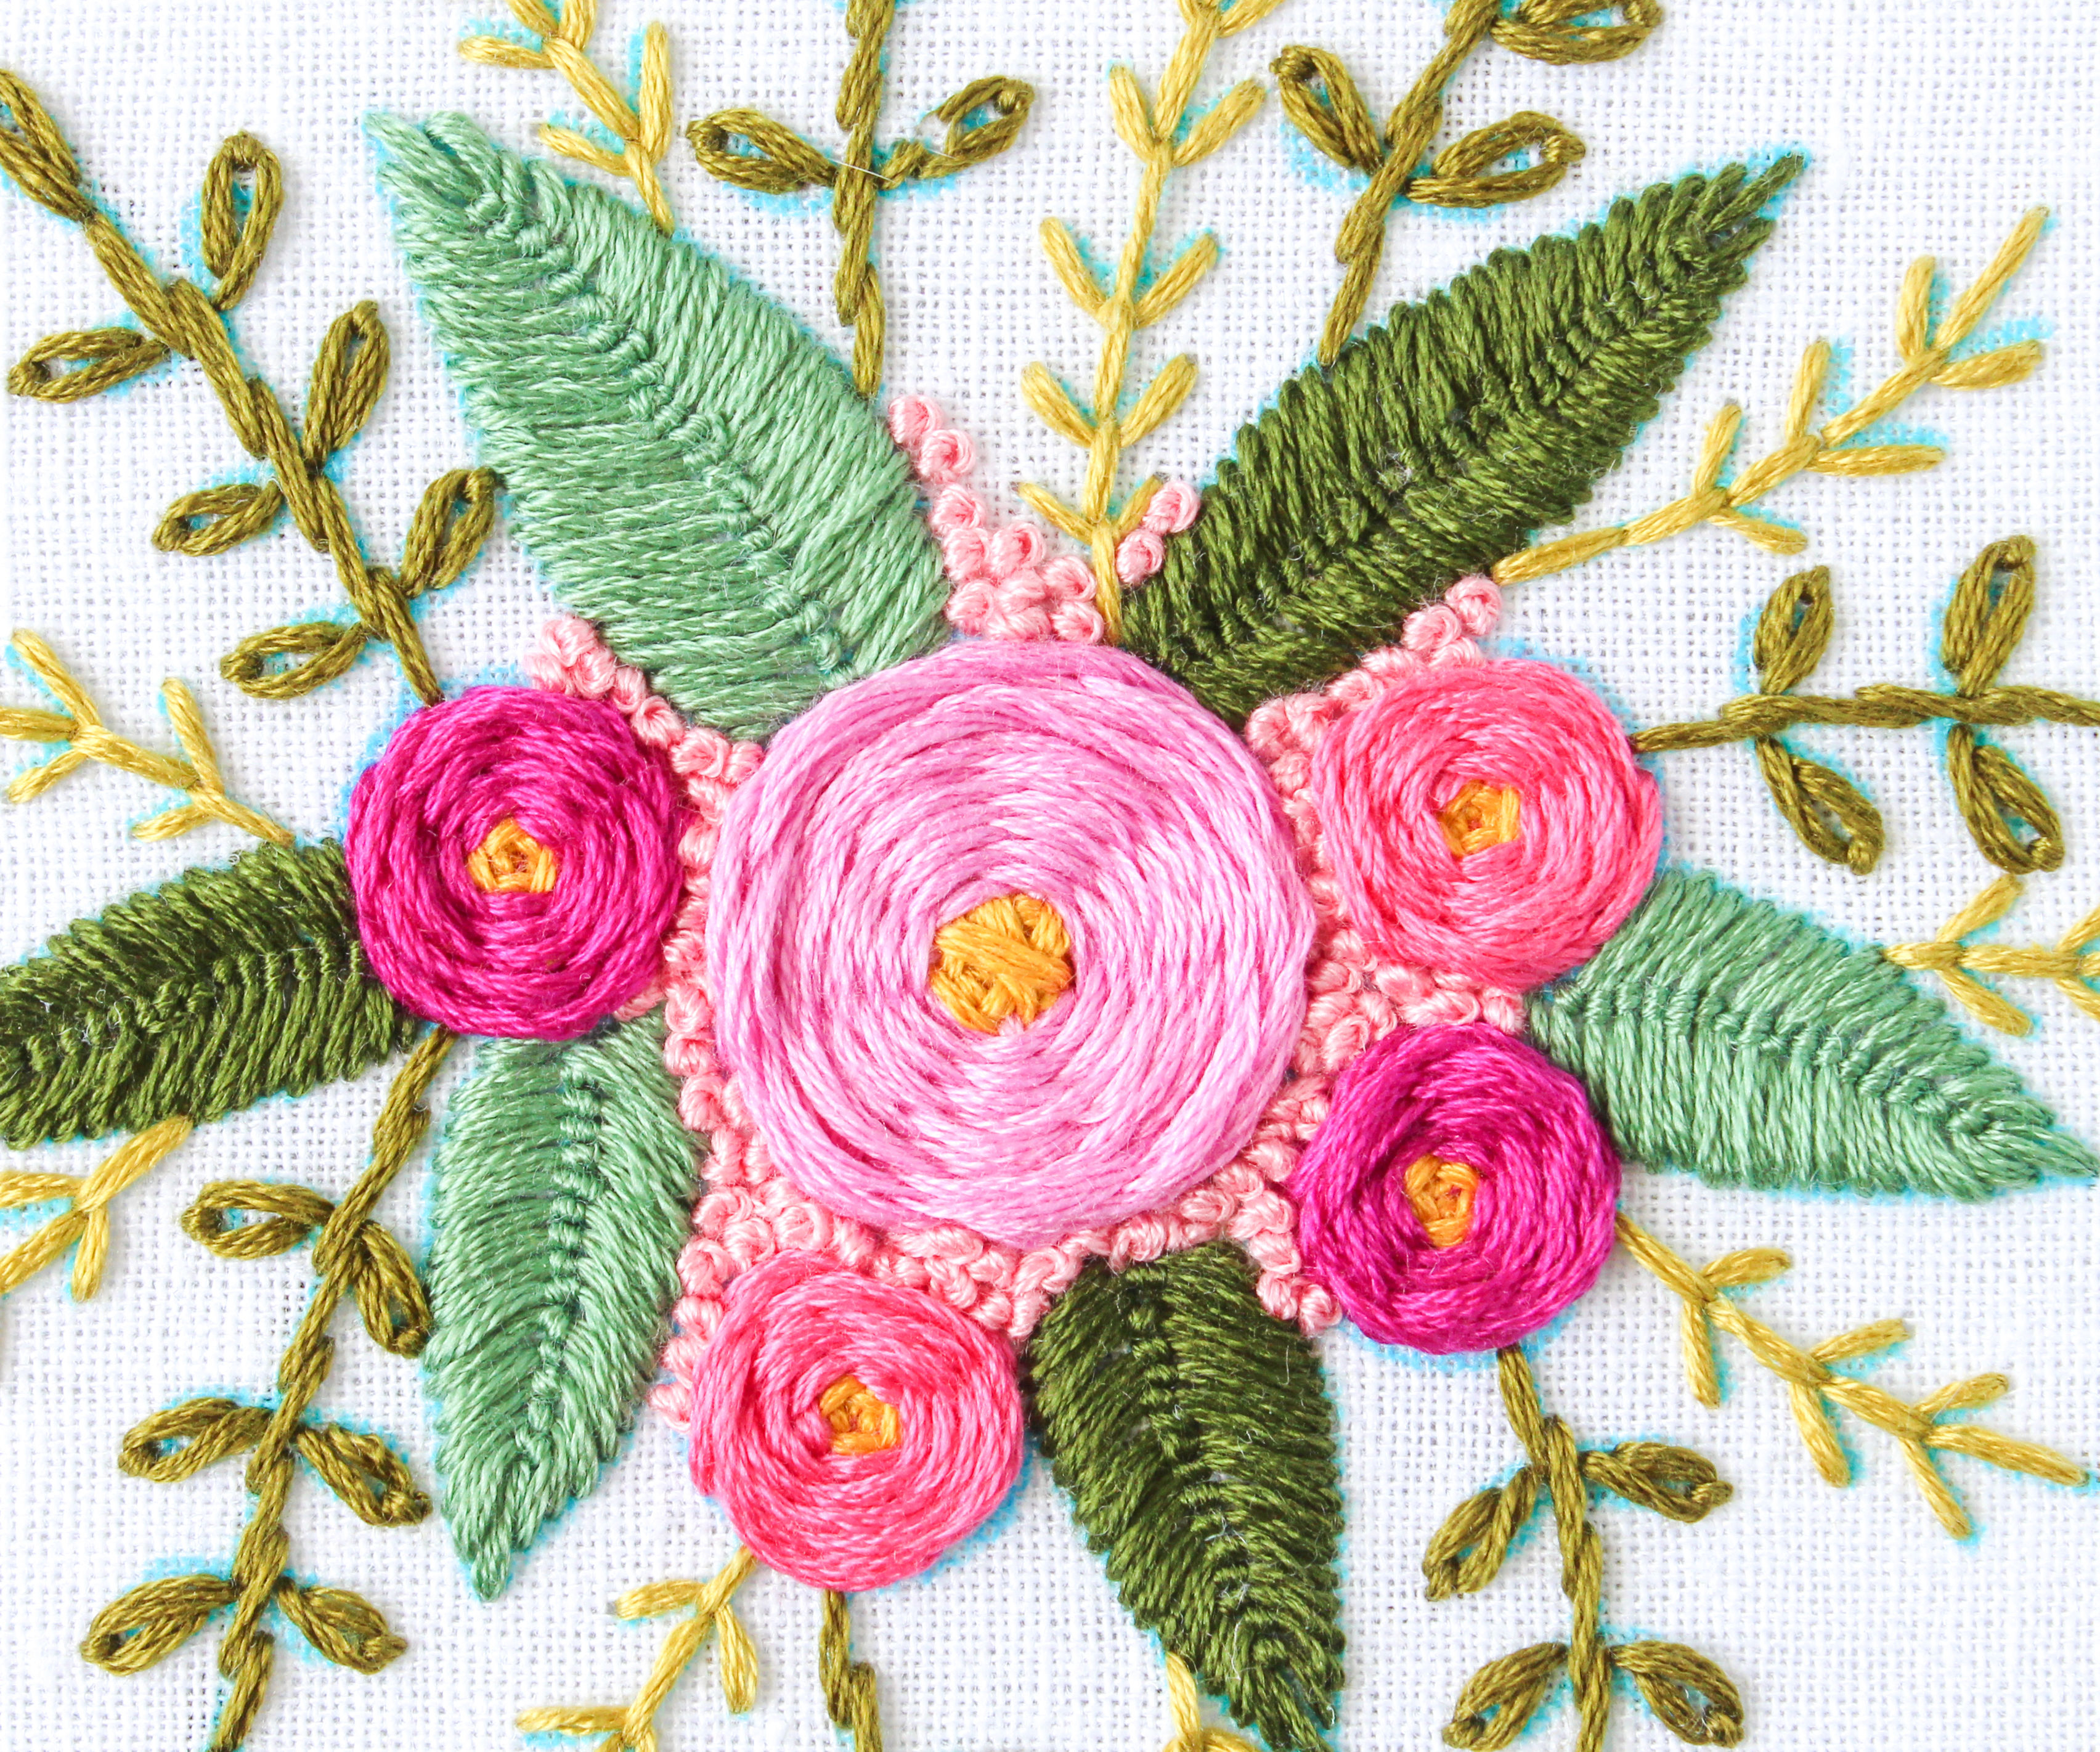 Hand Embroidery Flowers Patterns How To Hand Embroider Flowers 7 Steps With Pictures